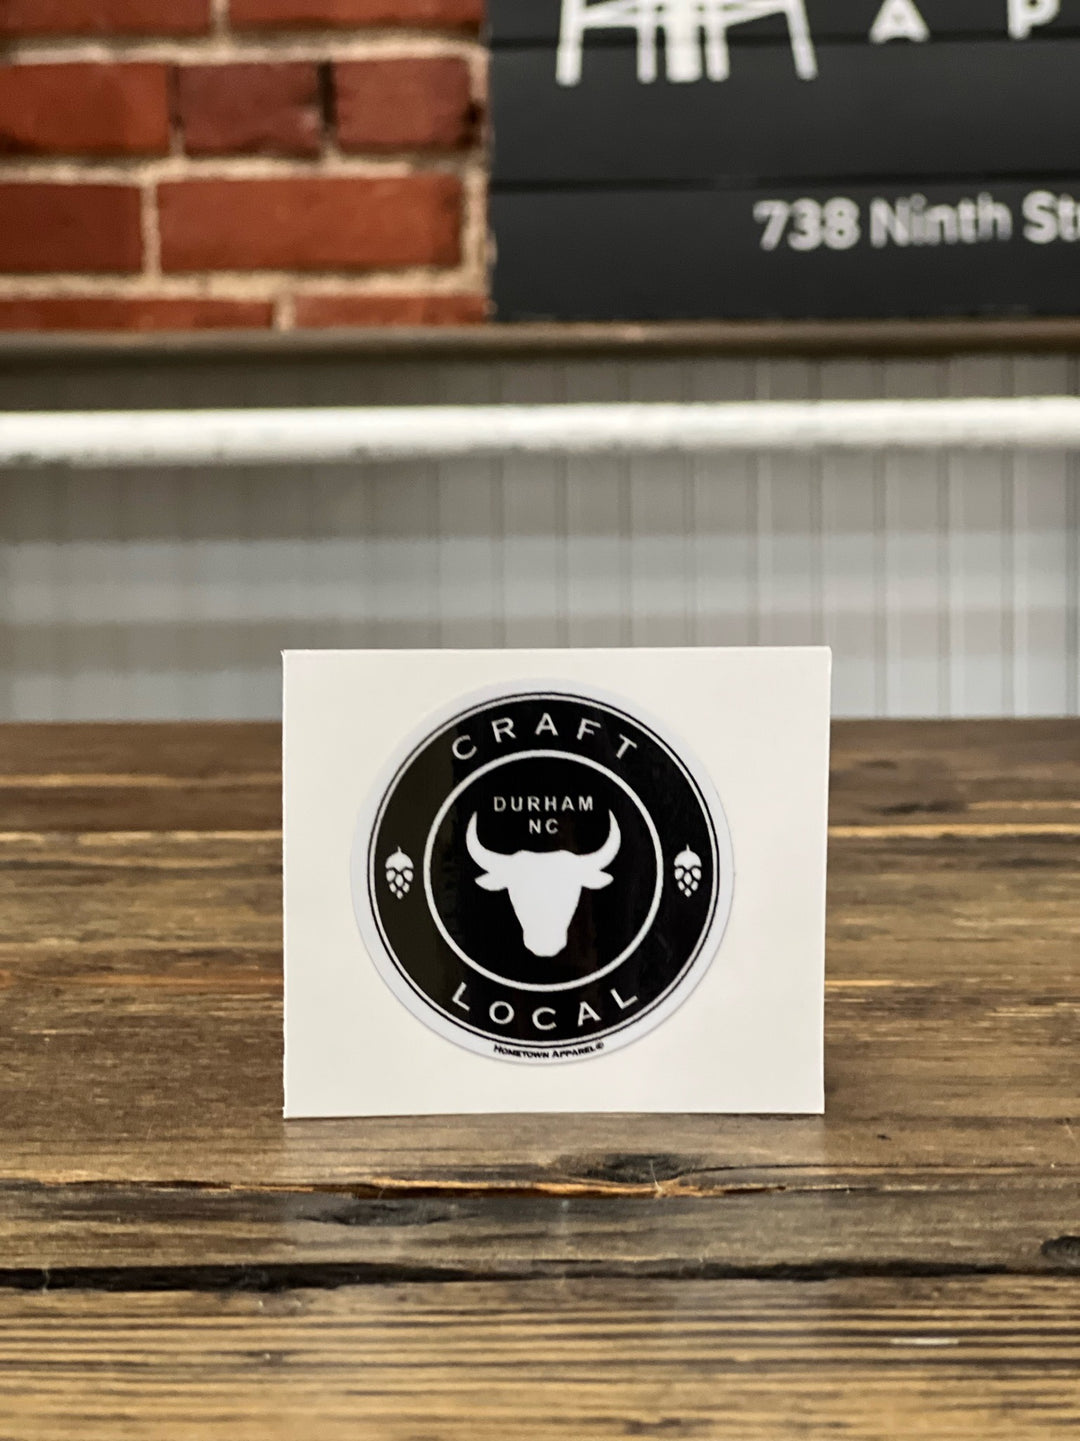 Craft Local Decal #18